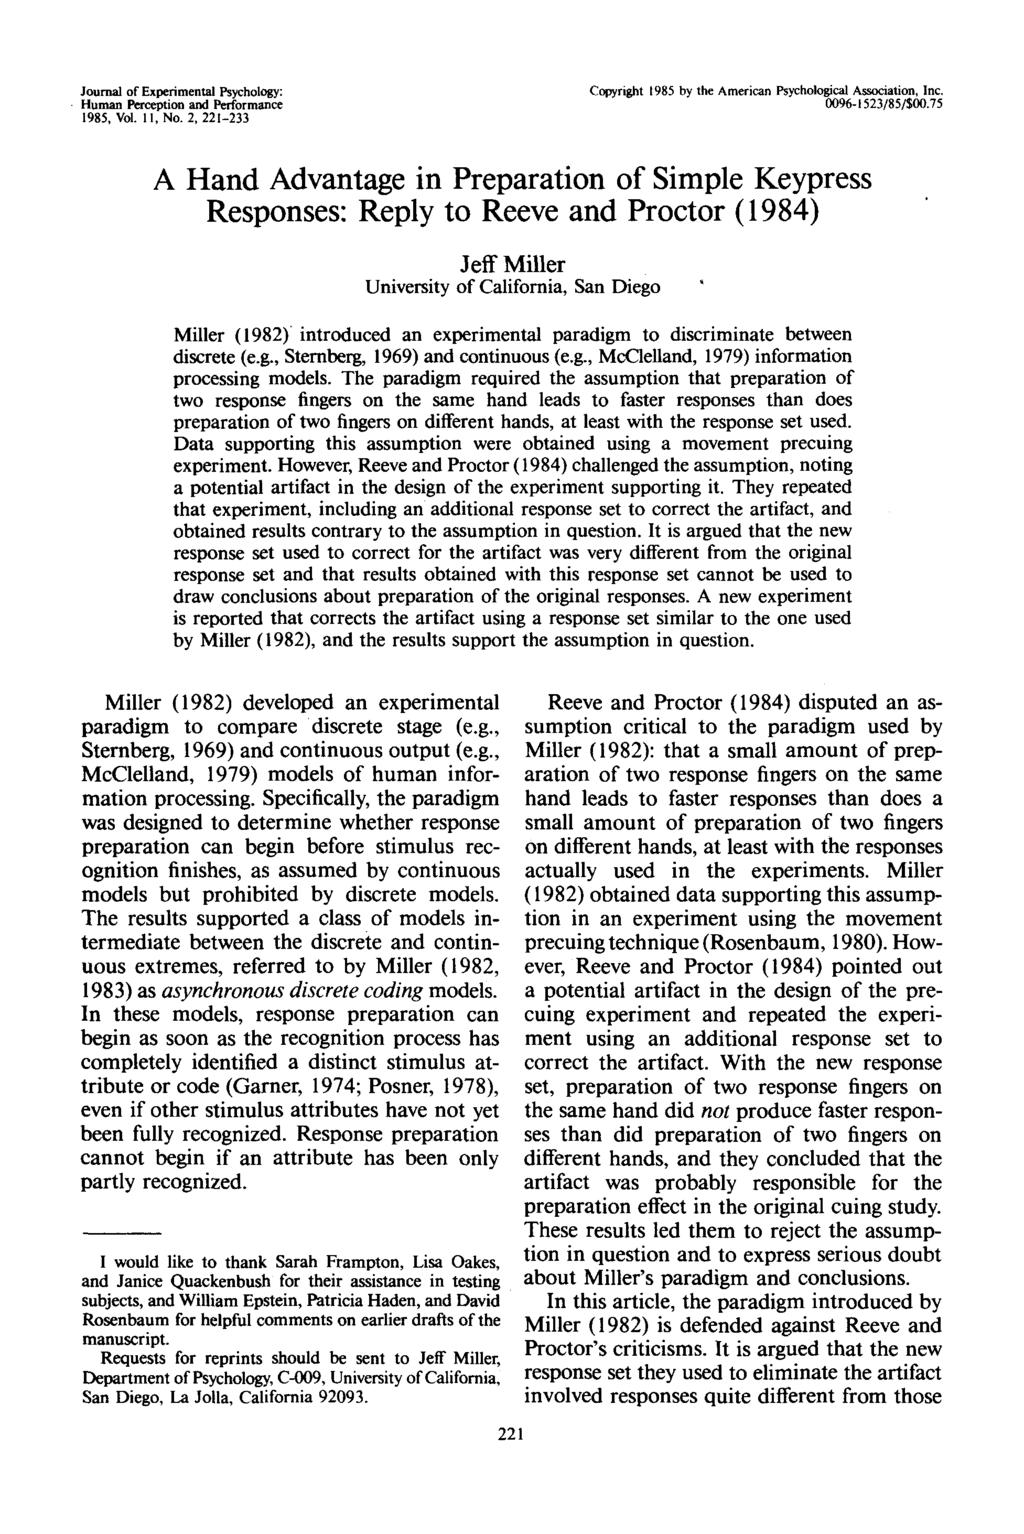 Journal of Experimental Psychology: Human Perception and Performance 1985, Vol. 11, No. 2, 221-233 Copyright 1985 by the American Psychological Association, Inc. 0096-1523/85/$00.